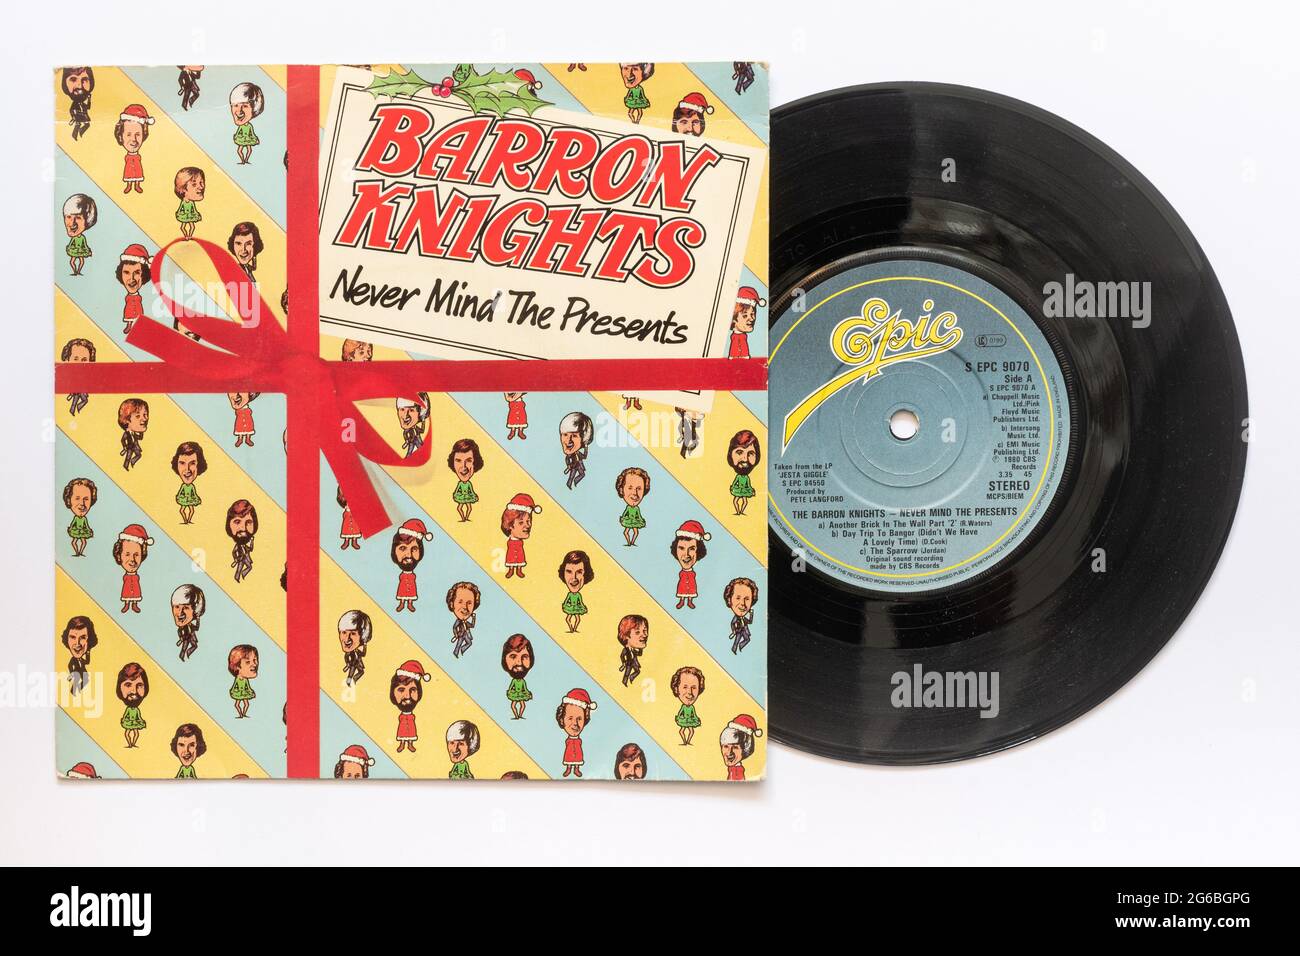 Never mind the presents by the Barron Knights pop group, a stock photo of the 7' single vinyl 45 rpm record in picture sleeve Stock Photo